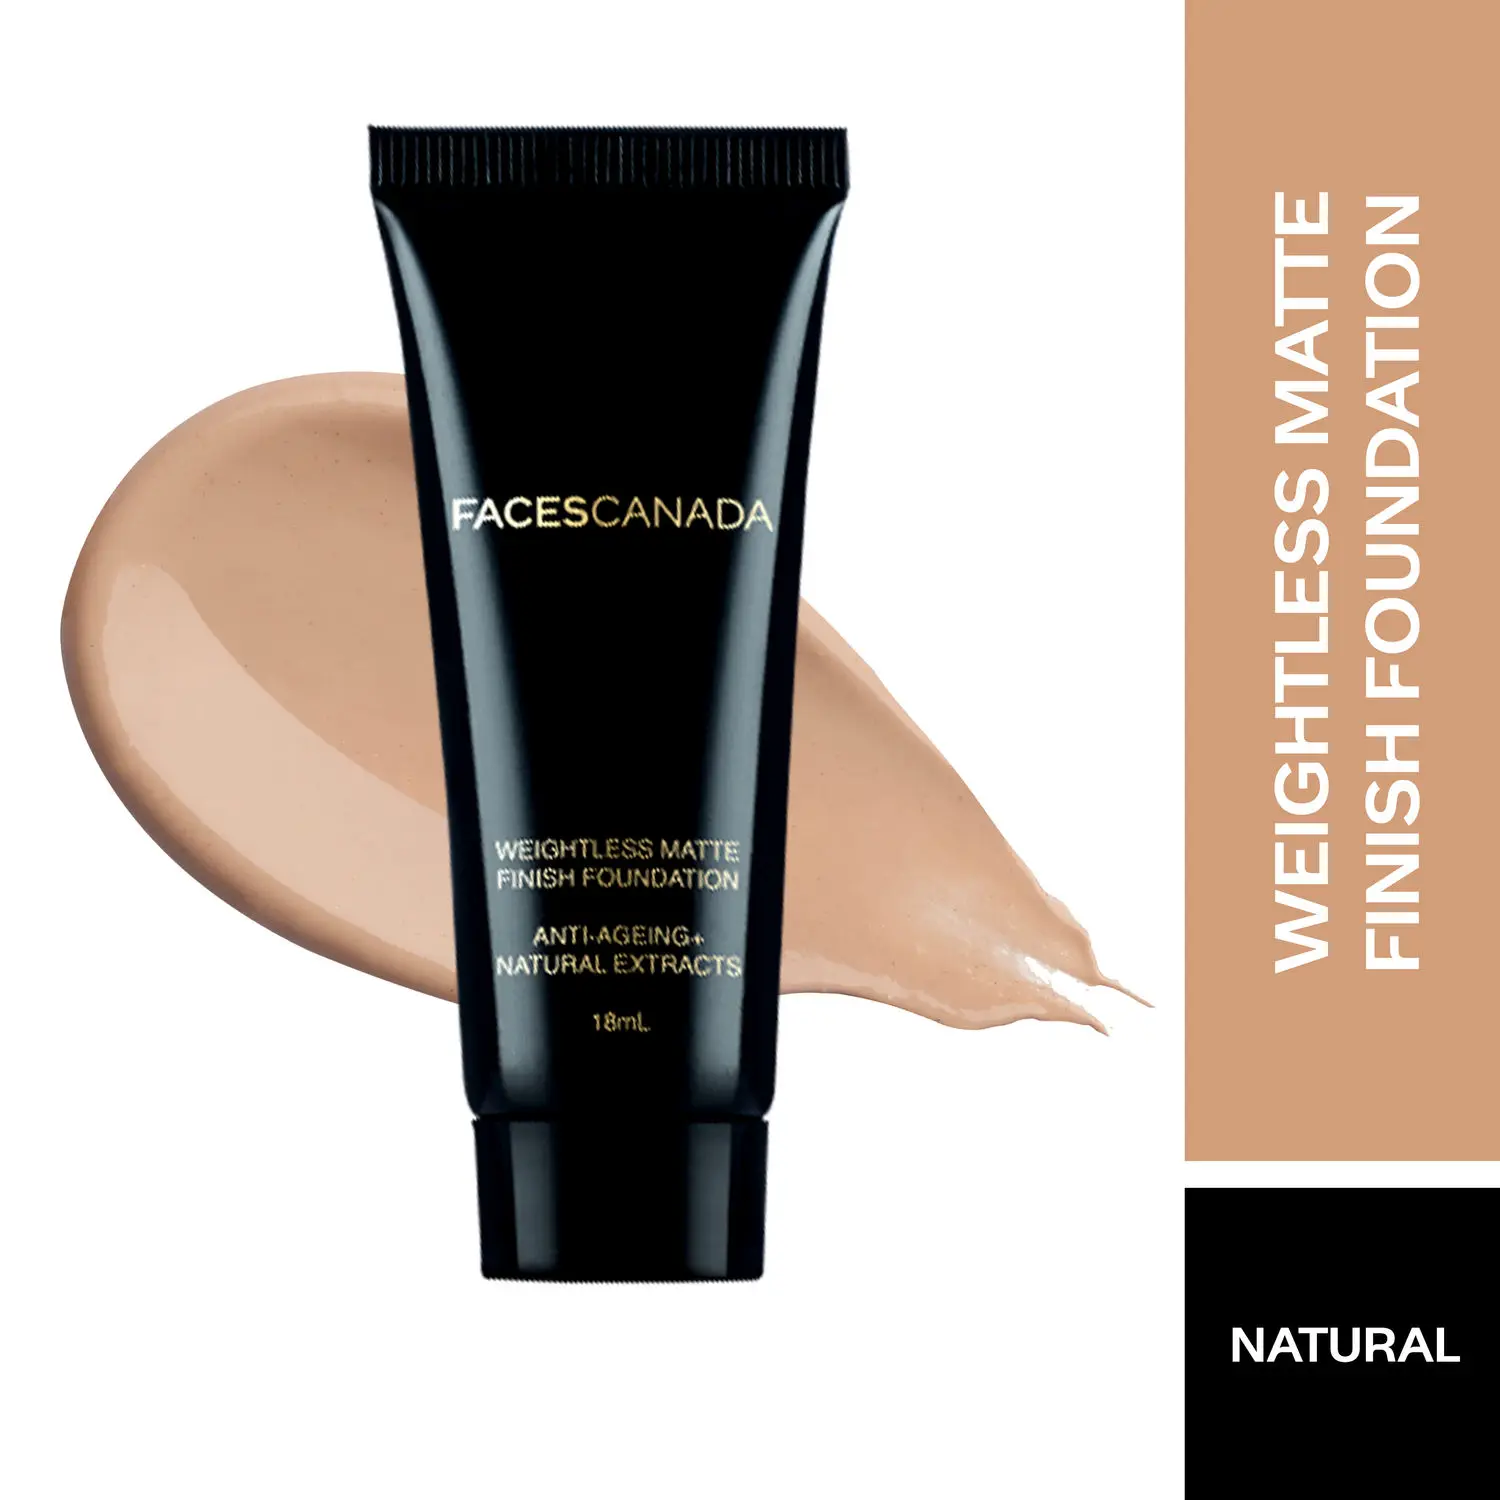 Faces Canada Weightless Matte Foundation | Grape extracts & Shea Butter|Natural Matte Finish | Dermatologically Tested | All Skin Types | Natural 18ml